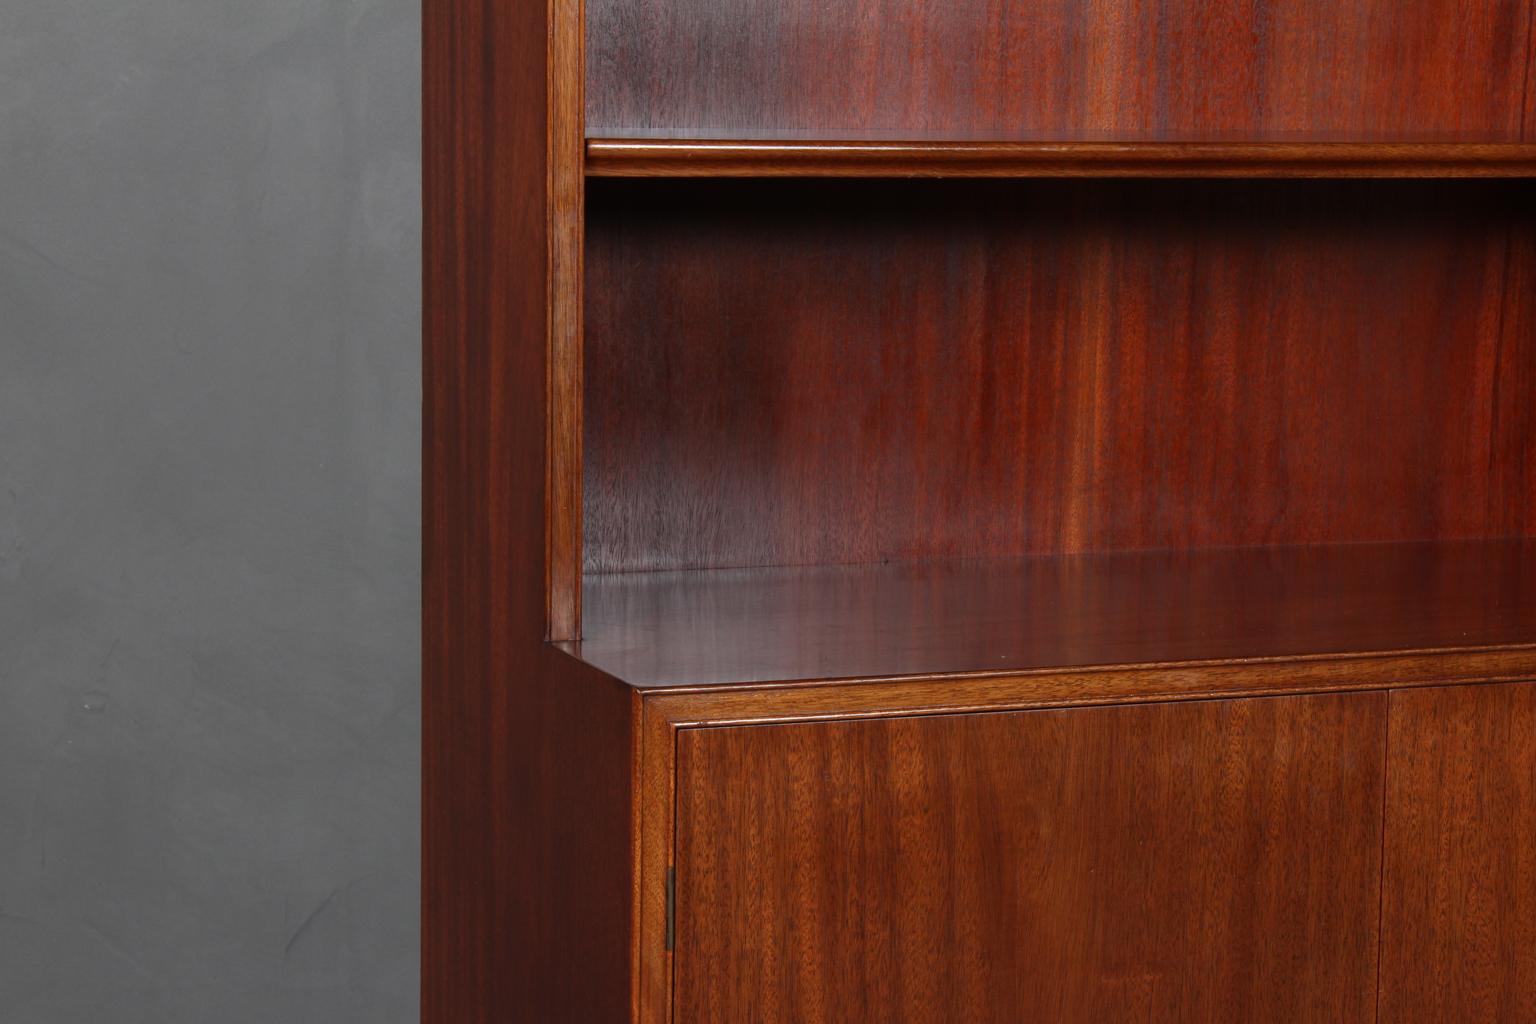 Frits Henningsen book cases in mahogany. With shelves and doors. Keys included.

Profilated details.

Made in the 1940's.